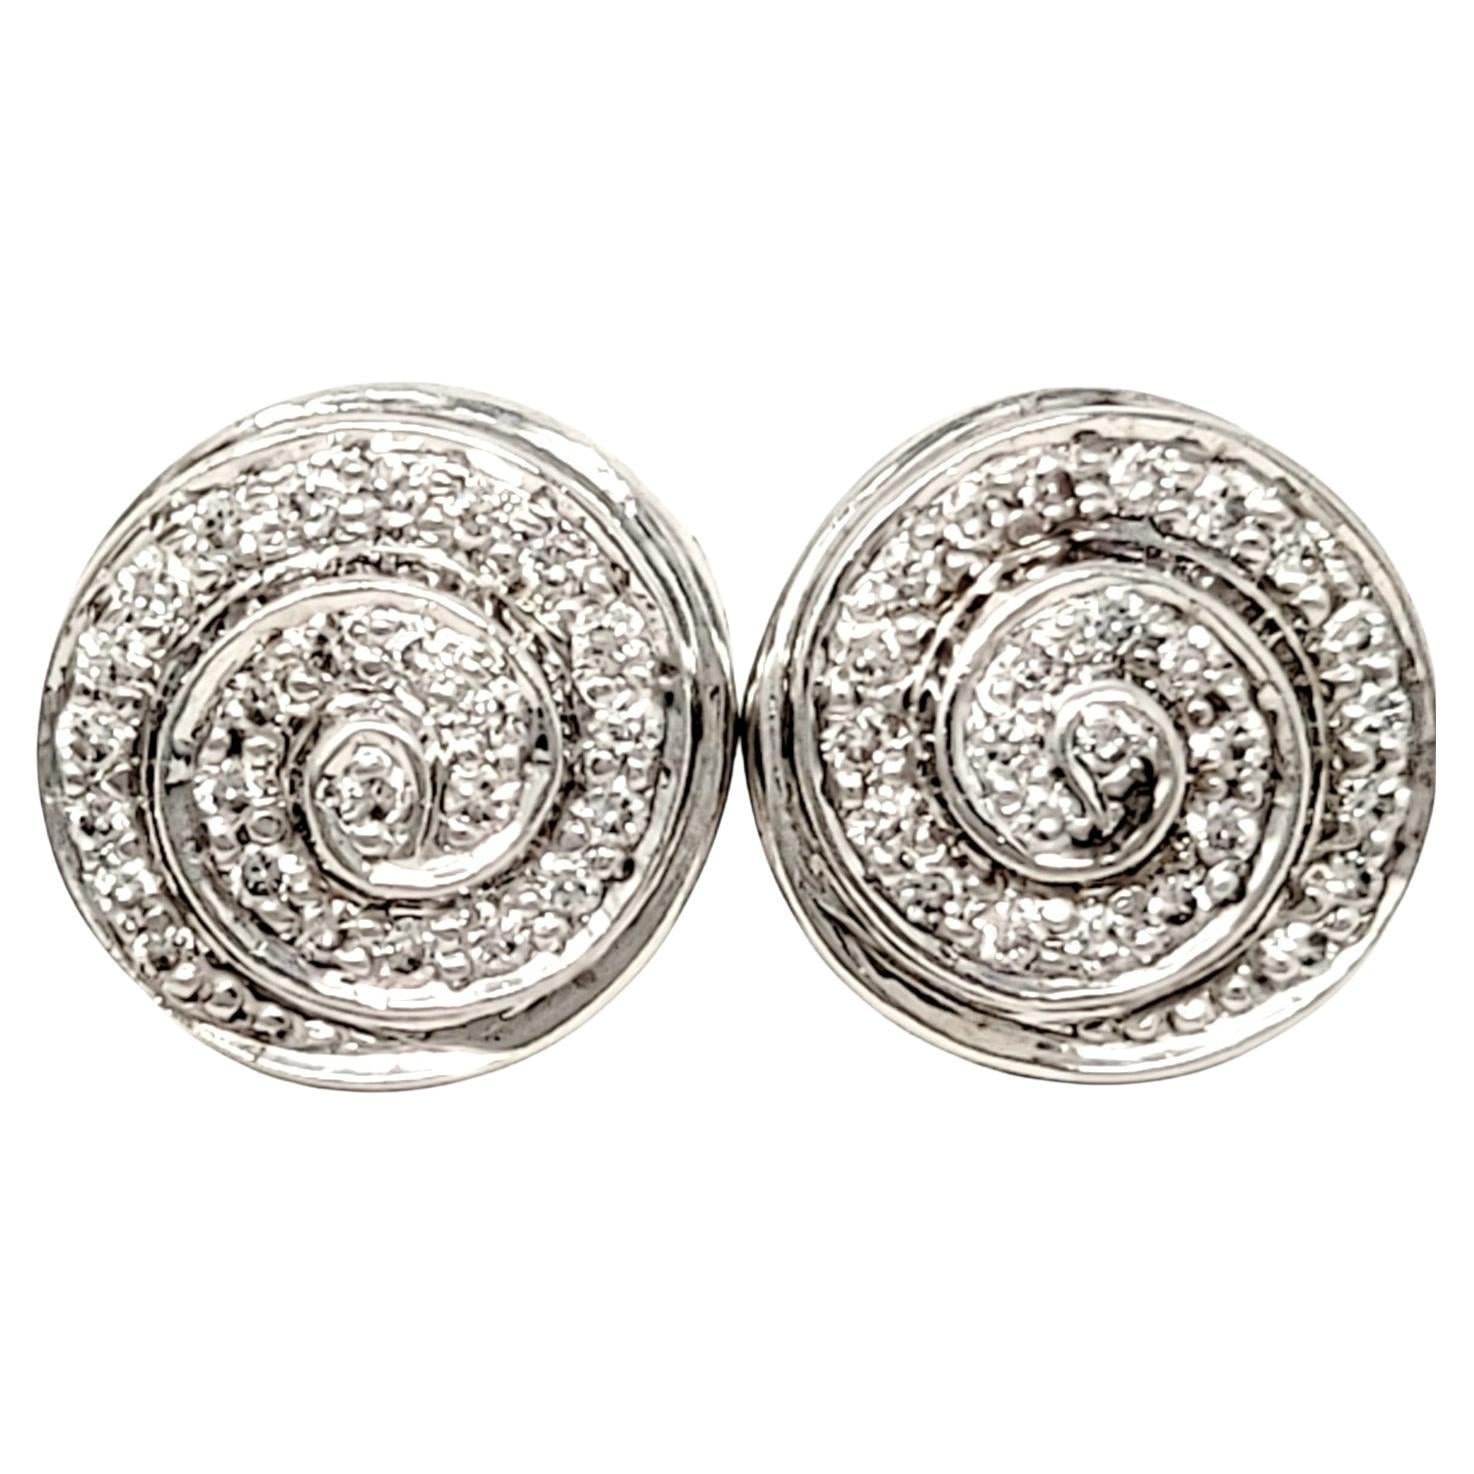 Beautiful diamond stud earrings with a unique modern twist. The sparkling natural stones are set in polished white gold and arranged in a nautilus design, allowing the glittering diamonds to swirl and sparkle from every angle.

Earring type: